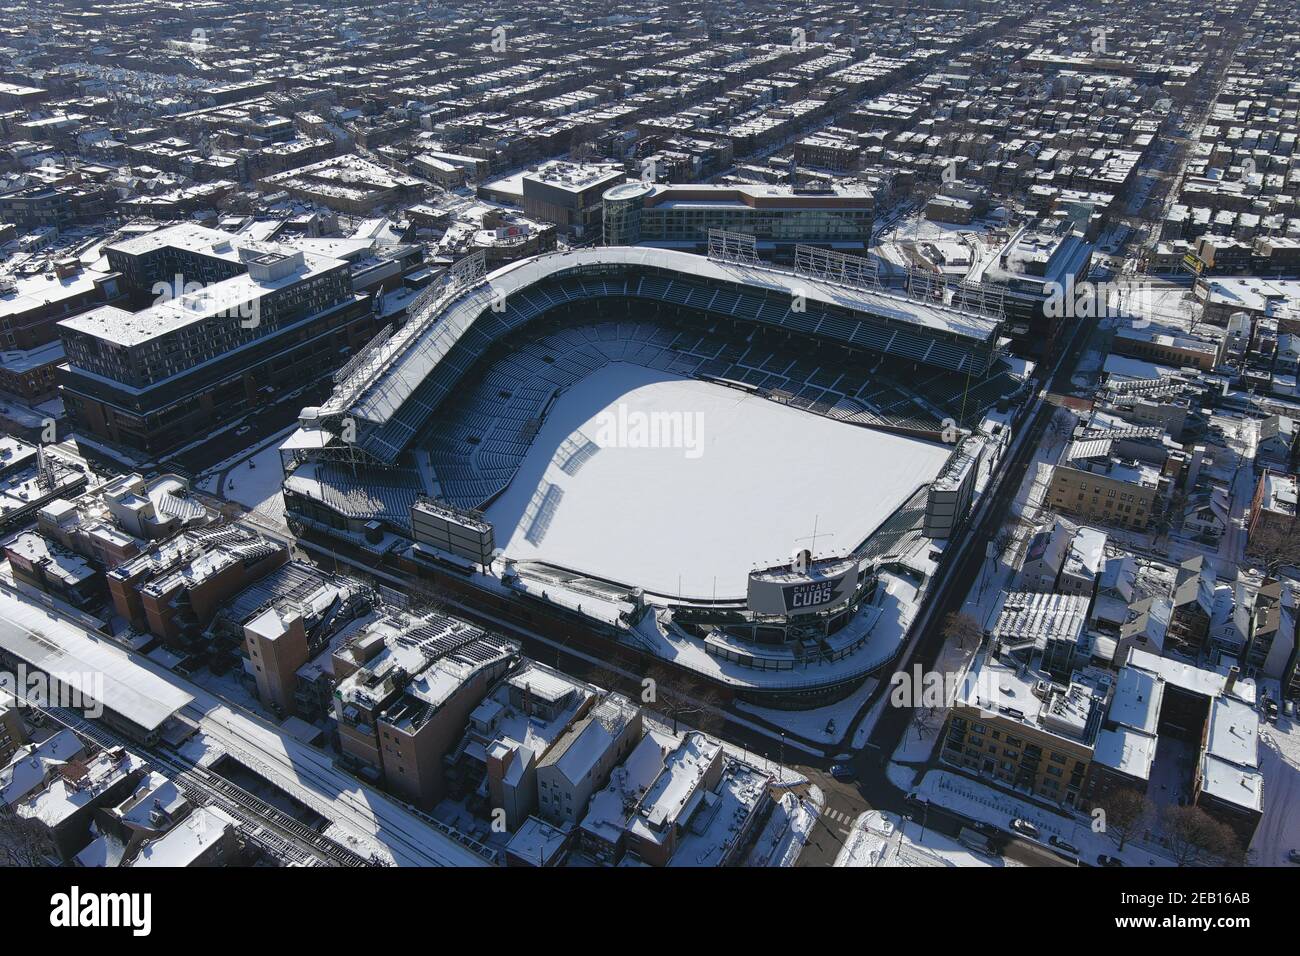 An aerial view of Wrigley Field, Sunday, Feb. 7, 2021, in Chicago. The stadium is the home of the Chicago Cubs. Stock Photo